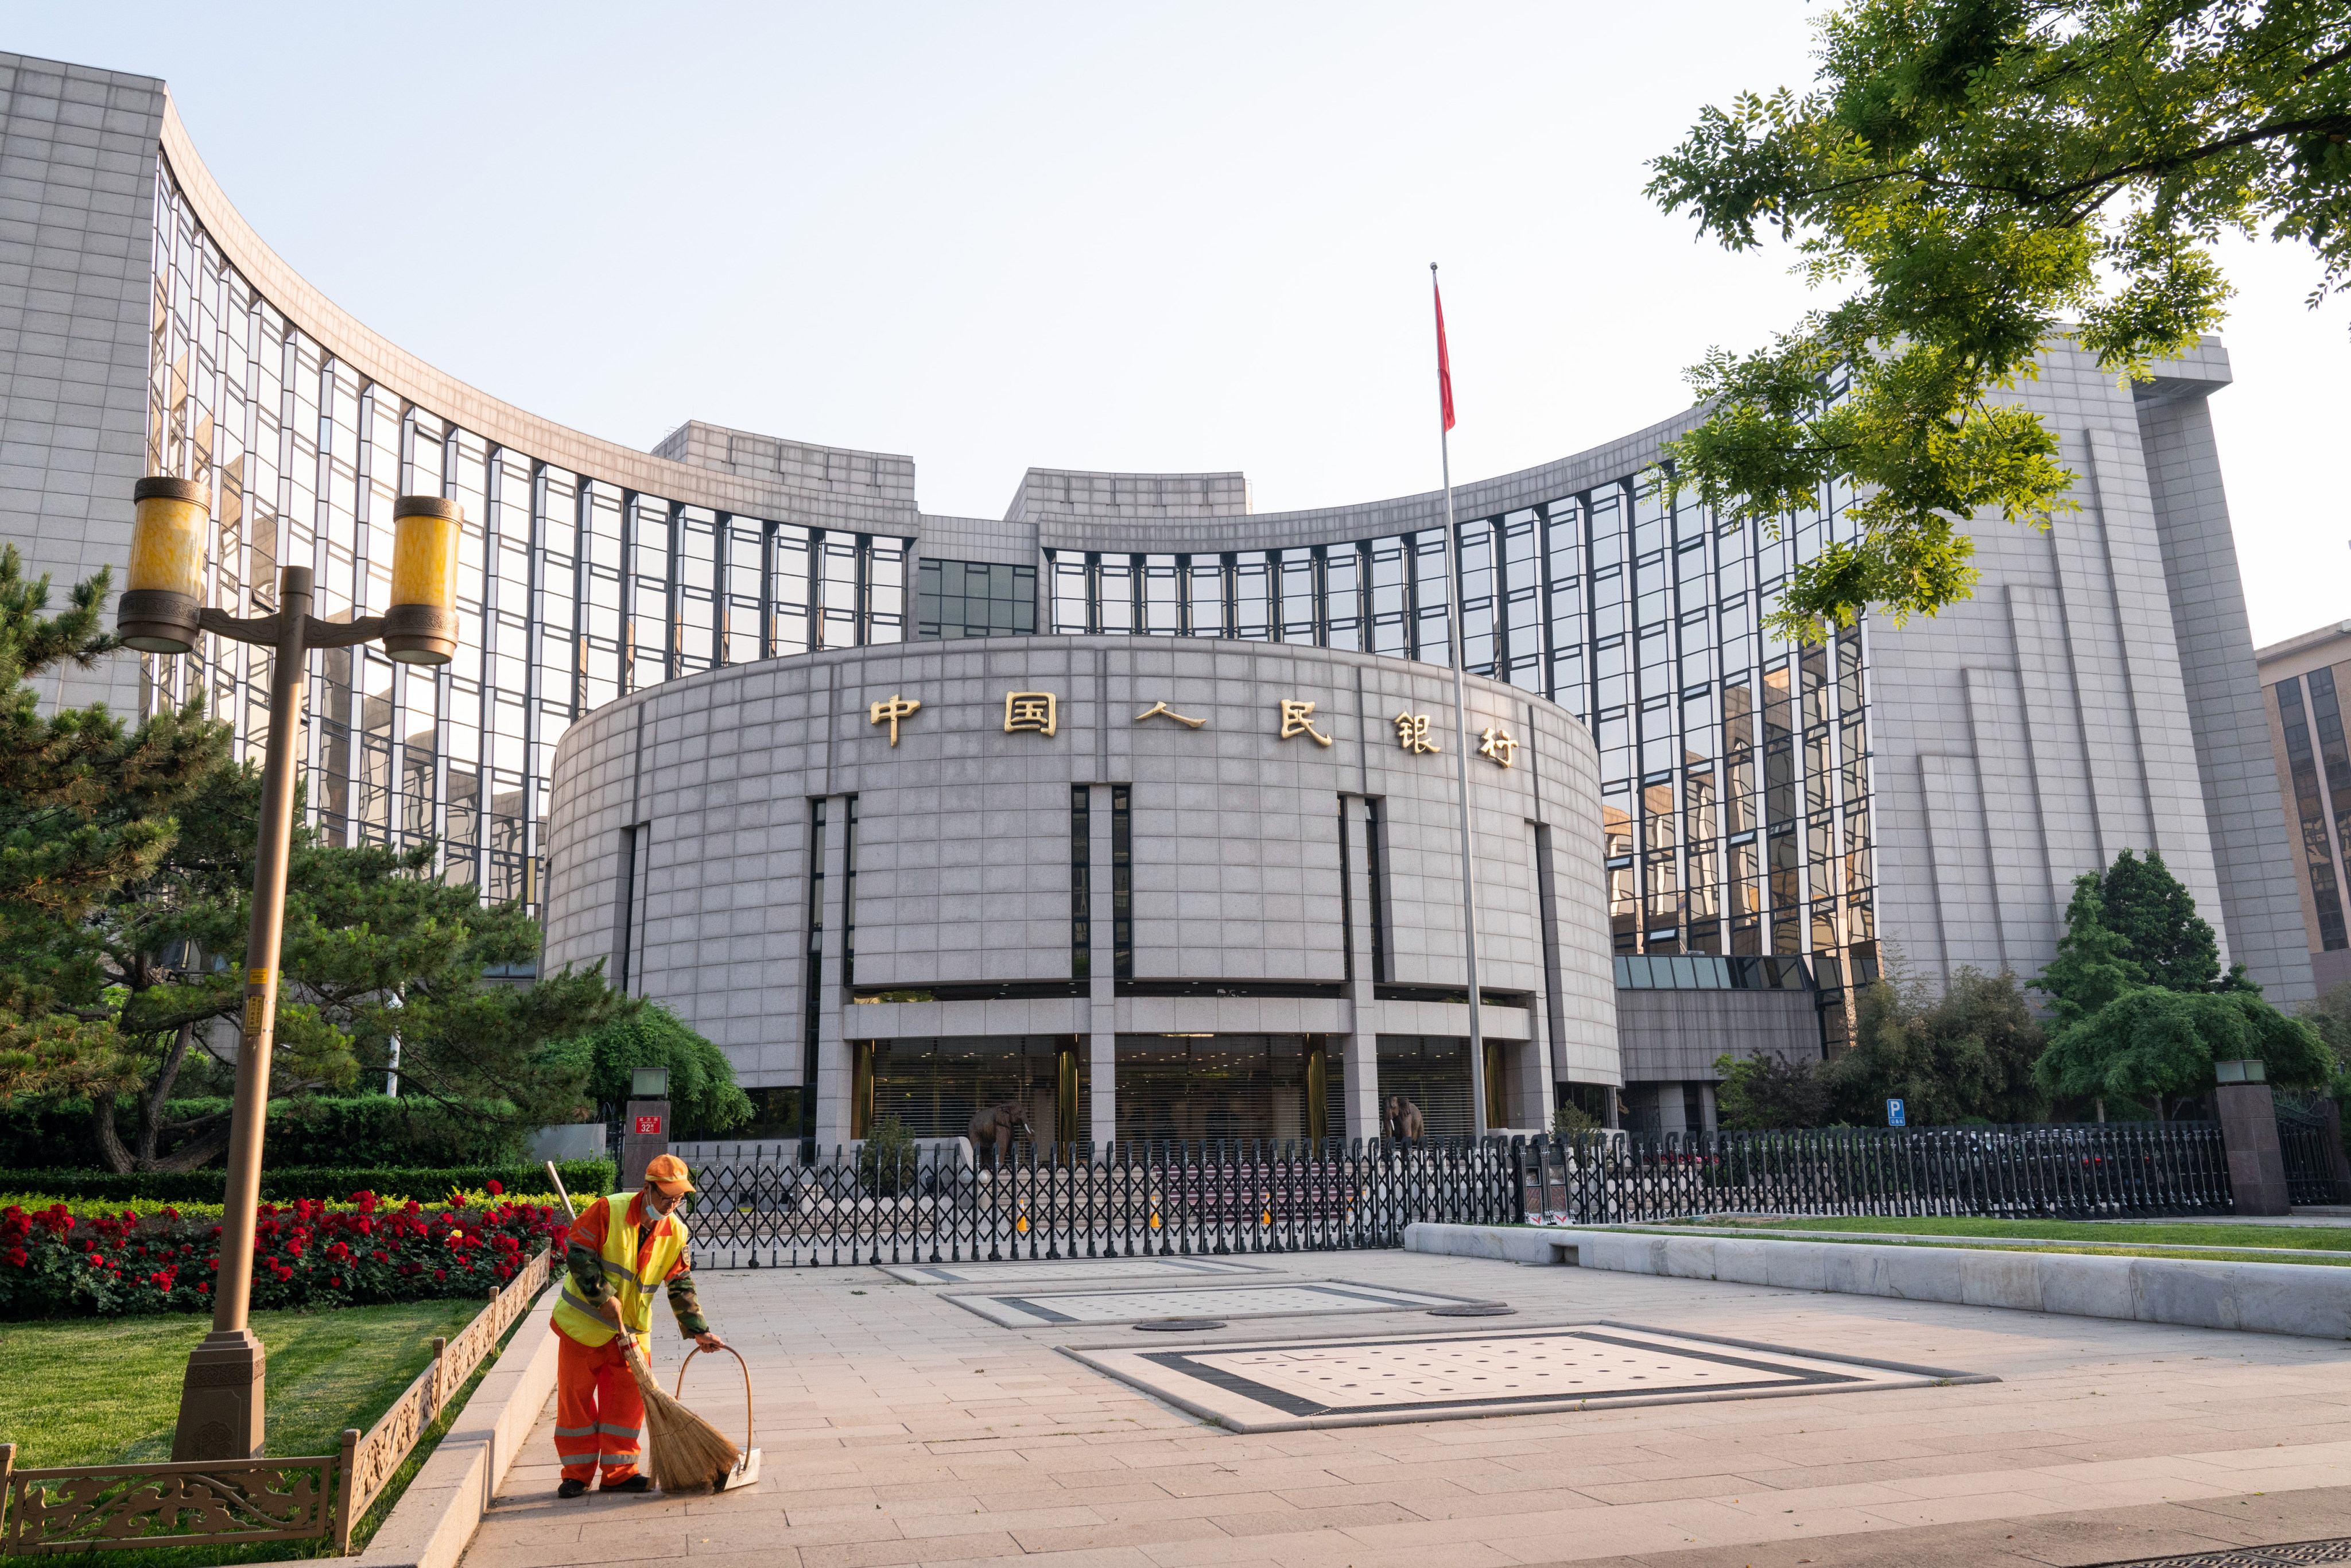 A cleaner sweeps the ground in front of the People’s Bank of China  headquarters in Beijing in 2021. More easing measures are likely as the Chinese economy is facing headwinds from lingering weakness in the property sector and recurring local Covid-19 outbreaks. Photo: Bloomberg 